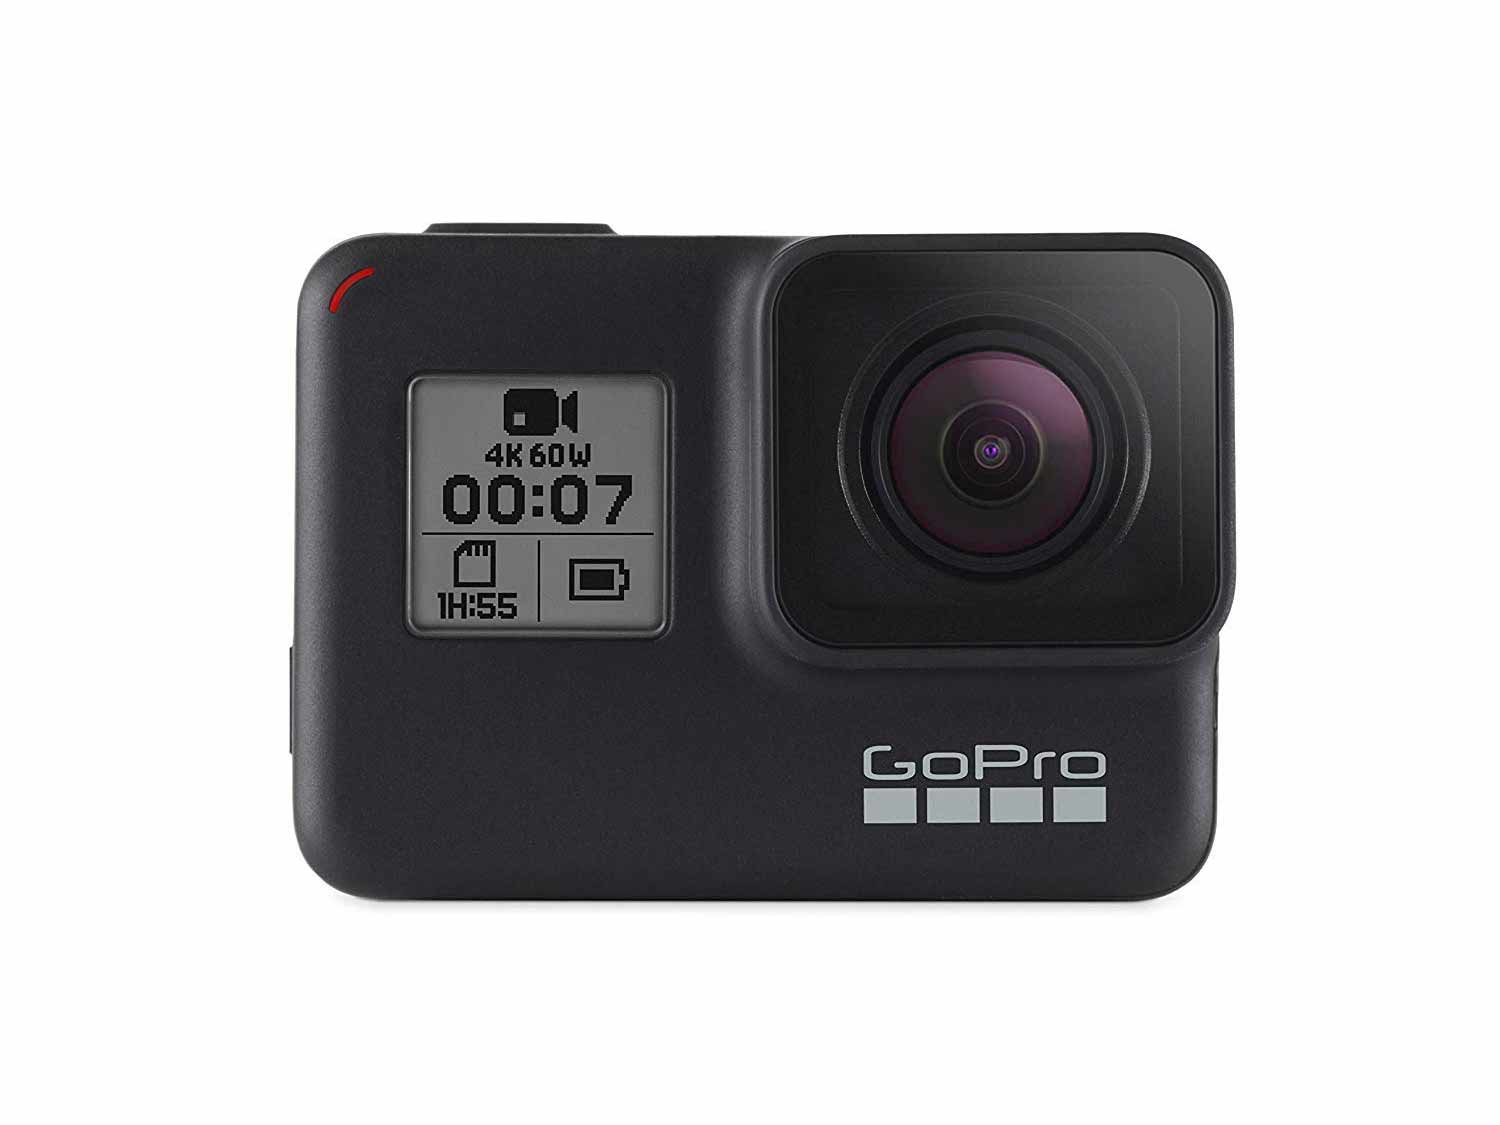 GoPro HERO7 Black - E-Commerce Packaging - Waterproof Digital Action Camera with Touch Screen 4K HD Video 12MP Photos Live Streaming Stabilization